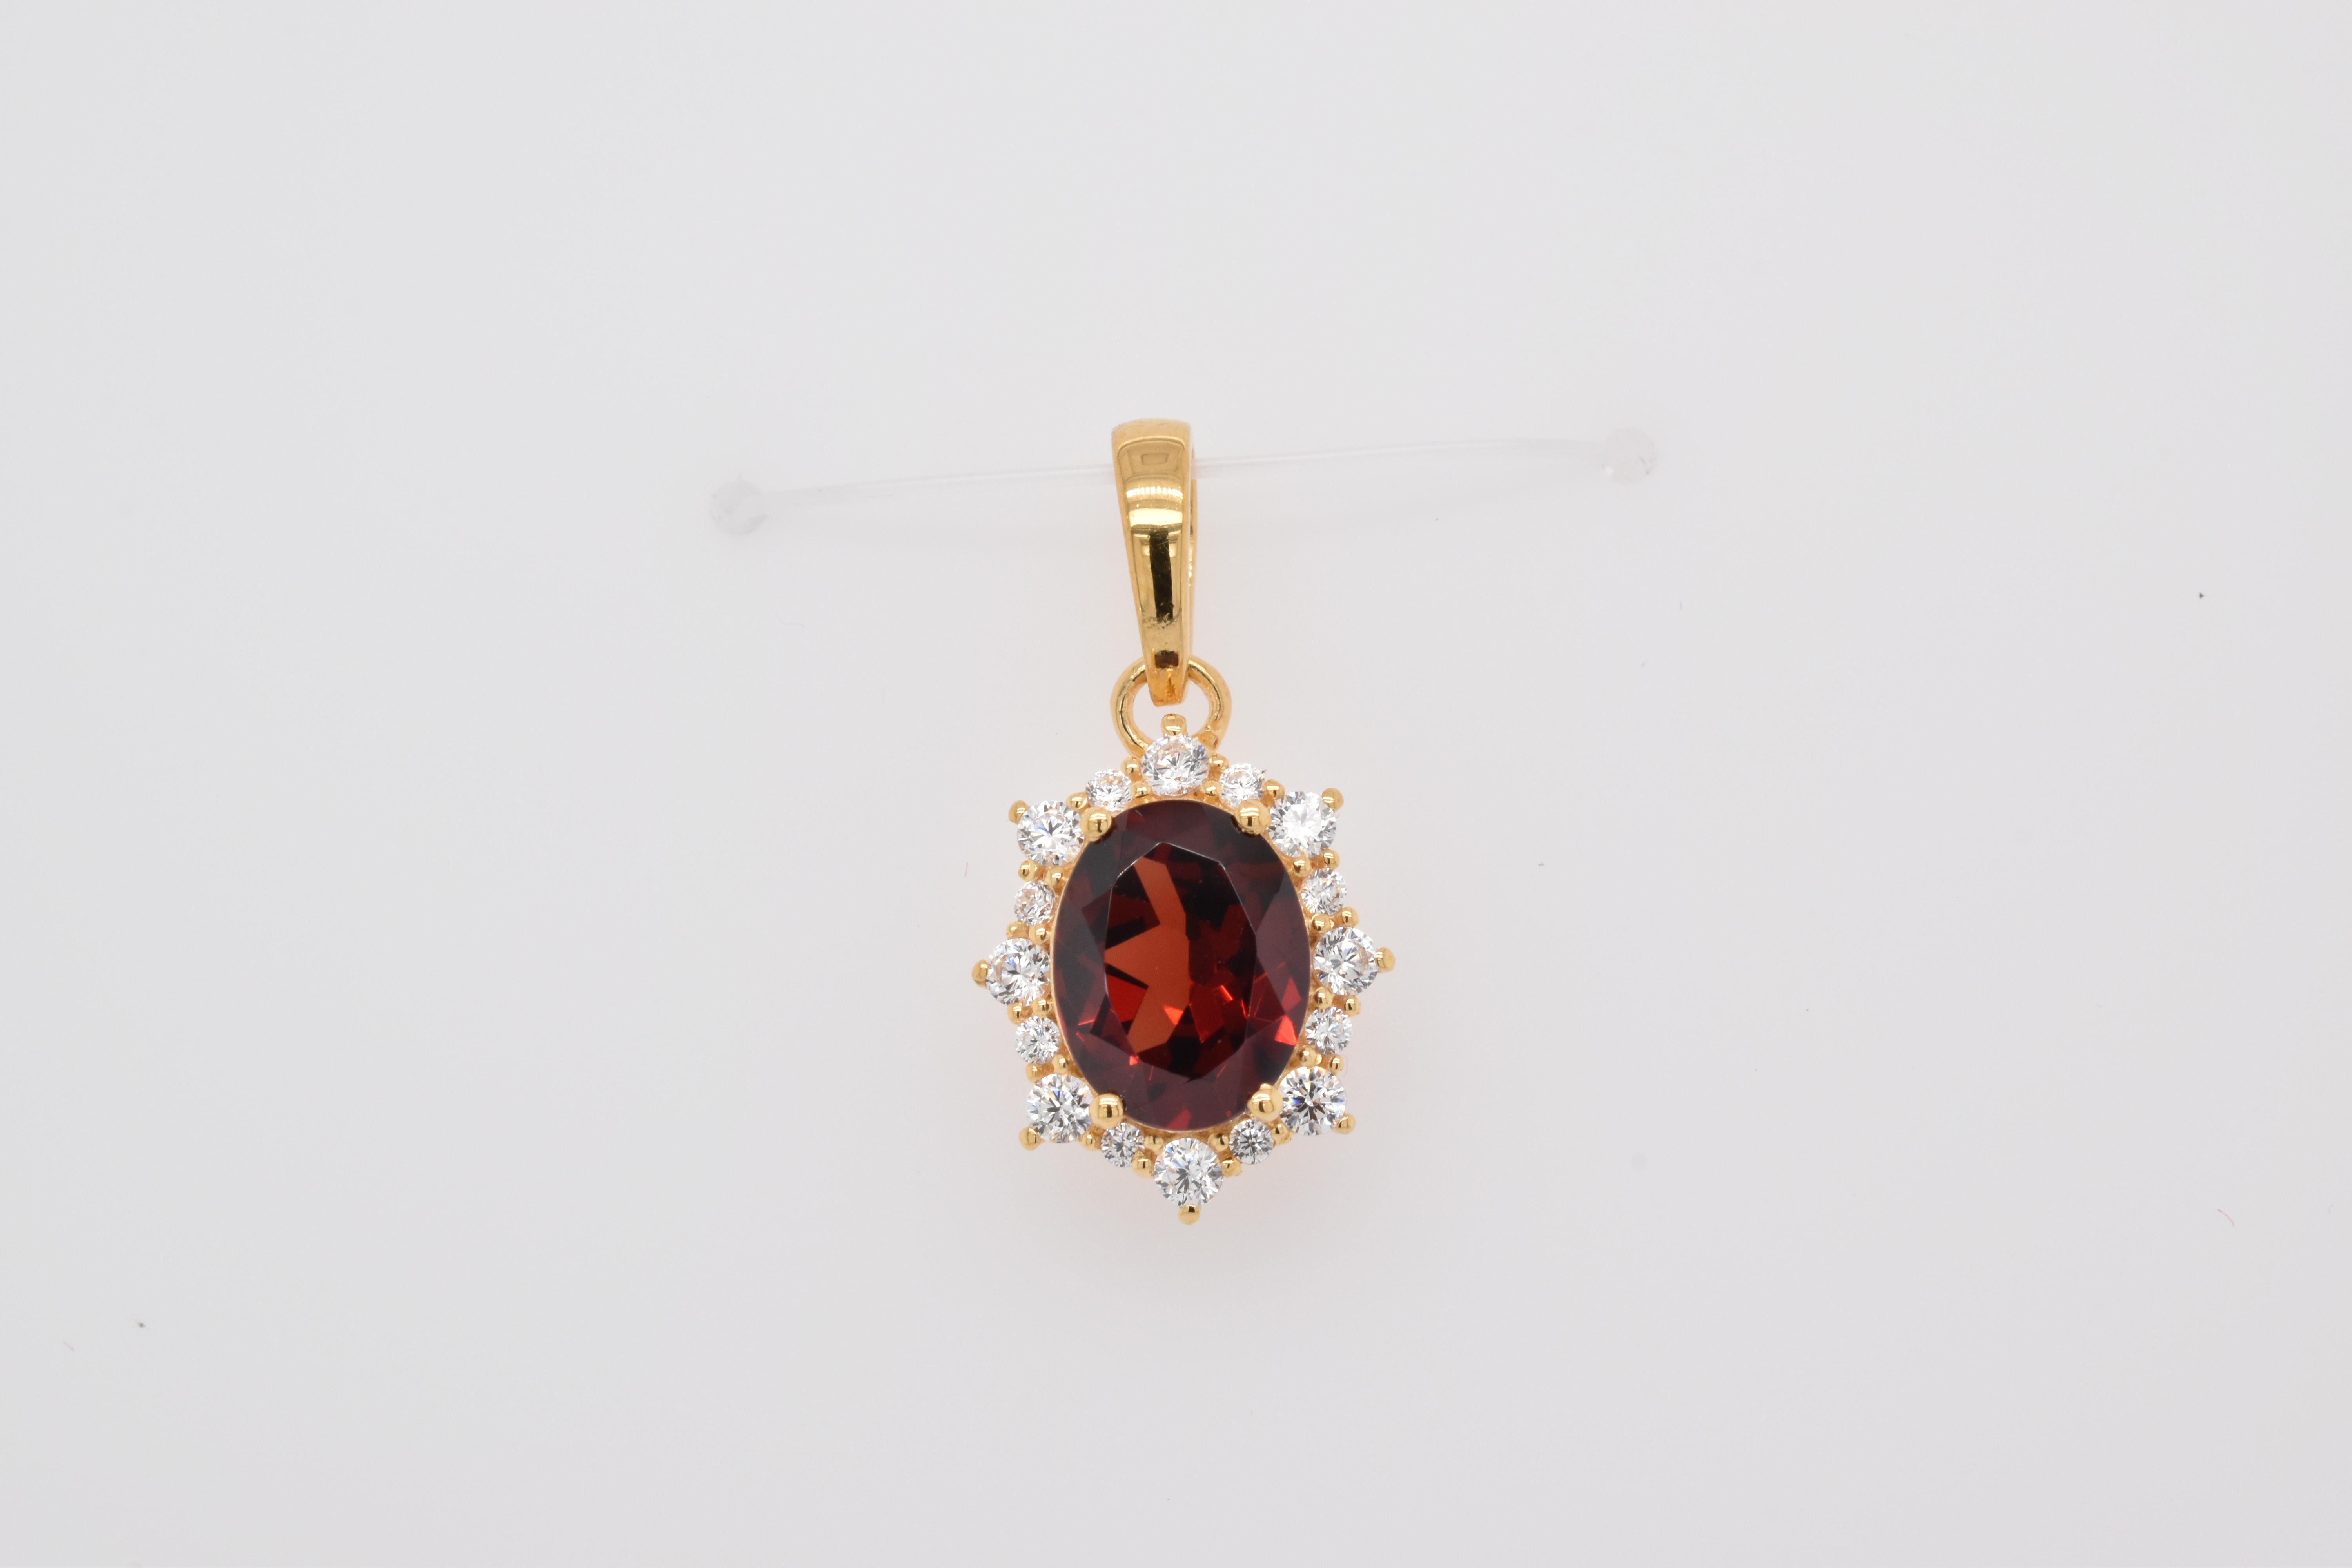 Oval Shape Garnet Gemstone And CZ beautifully crafted  in a Pendant. A fiery Red Color January Birthstone. For a special occasion like Engagement or Proposal or may be as a gift for a special person.

Primary Stone Size - 9x7 mm